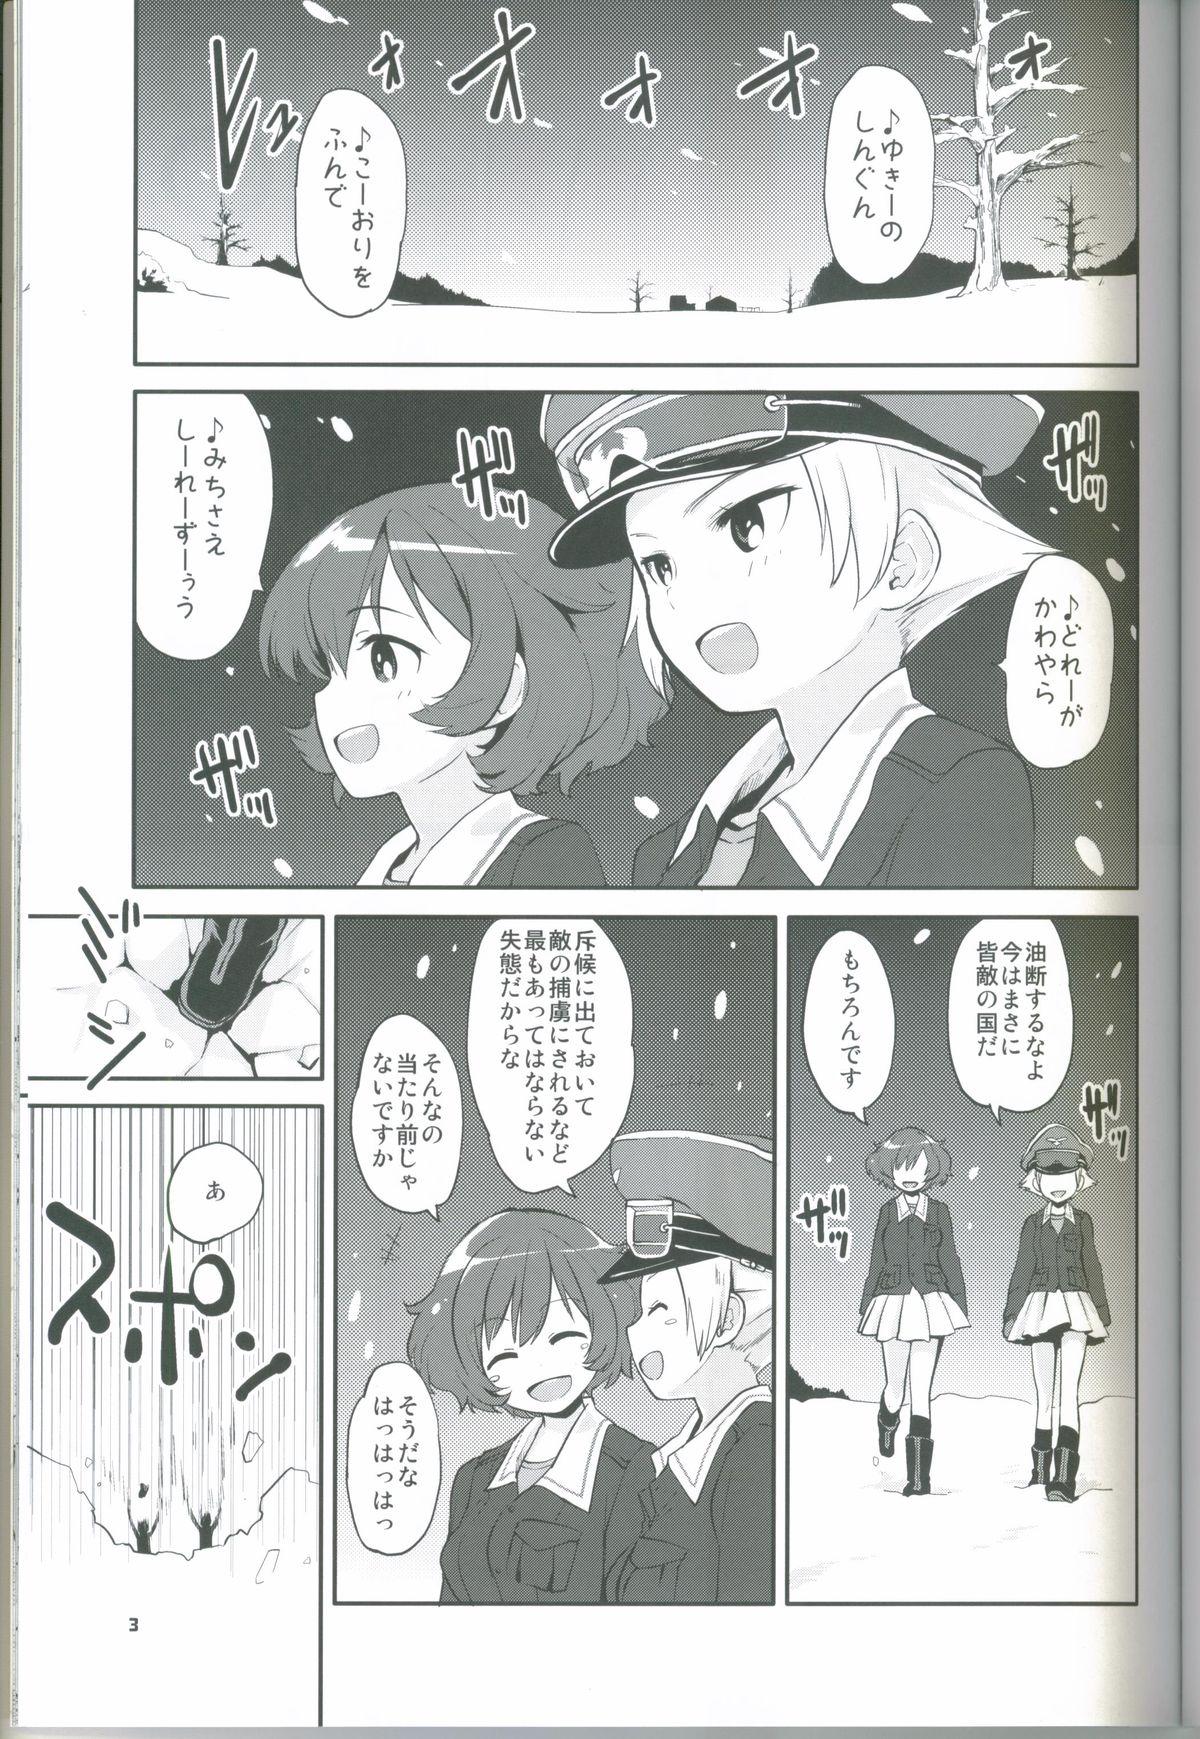 Tattooed The General Frost Has Come! - Girls und panzer Anus - Page 2